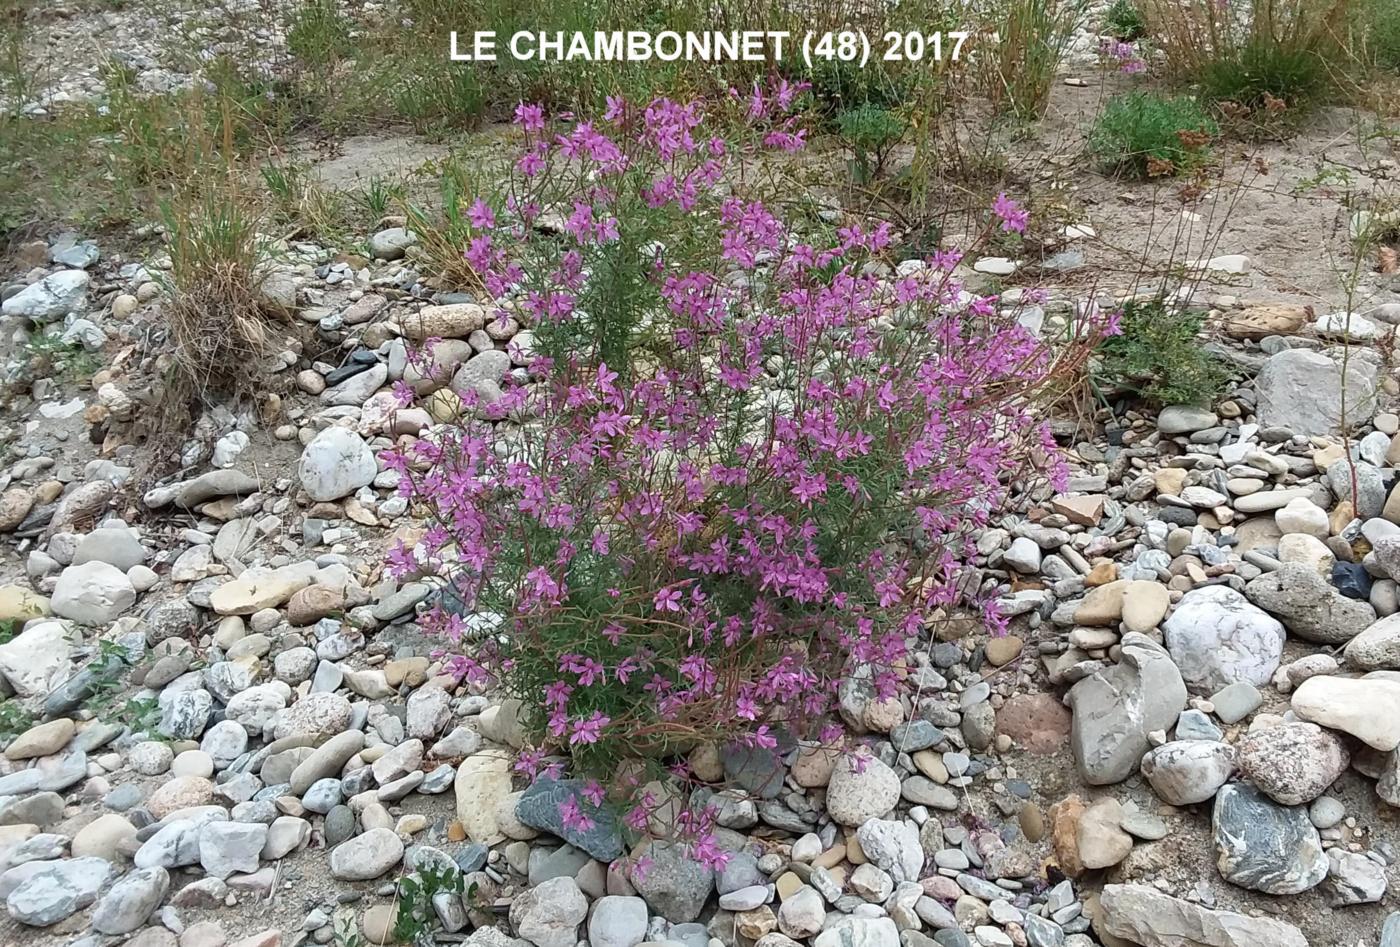 Willow-herb, [Rosemary-leaved] plant